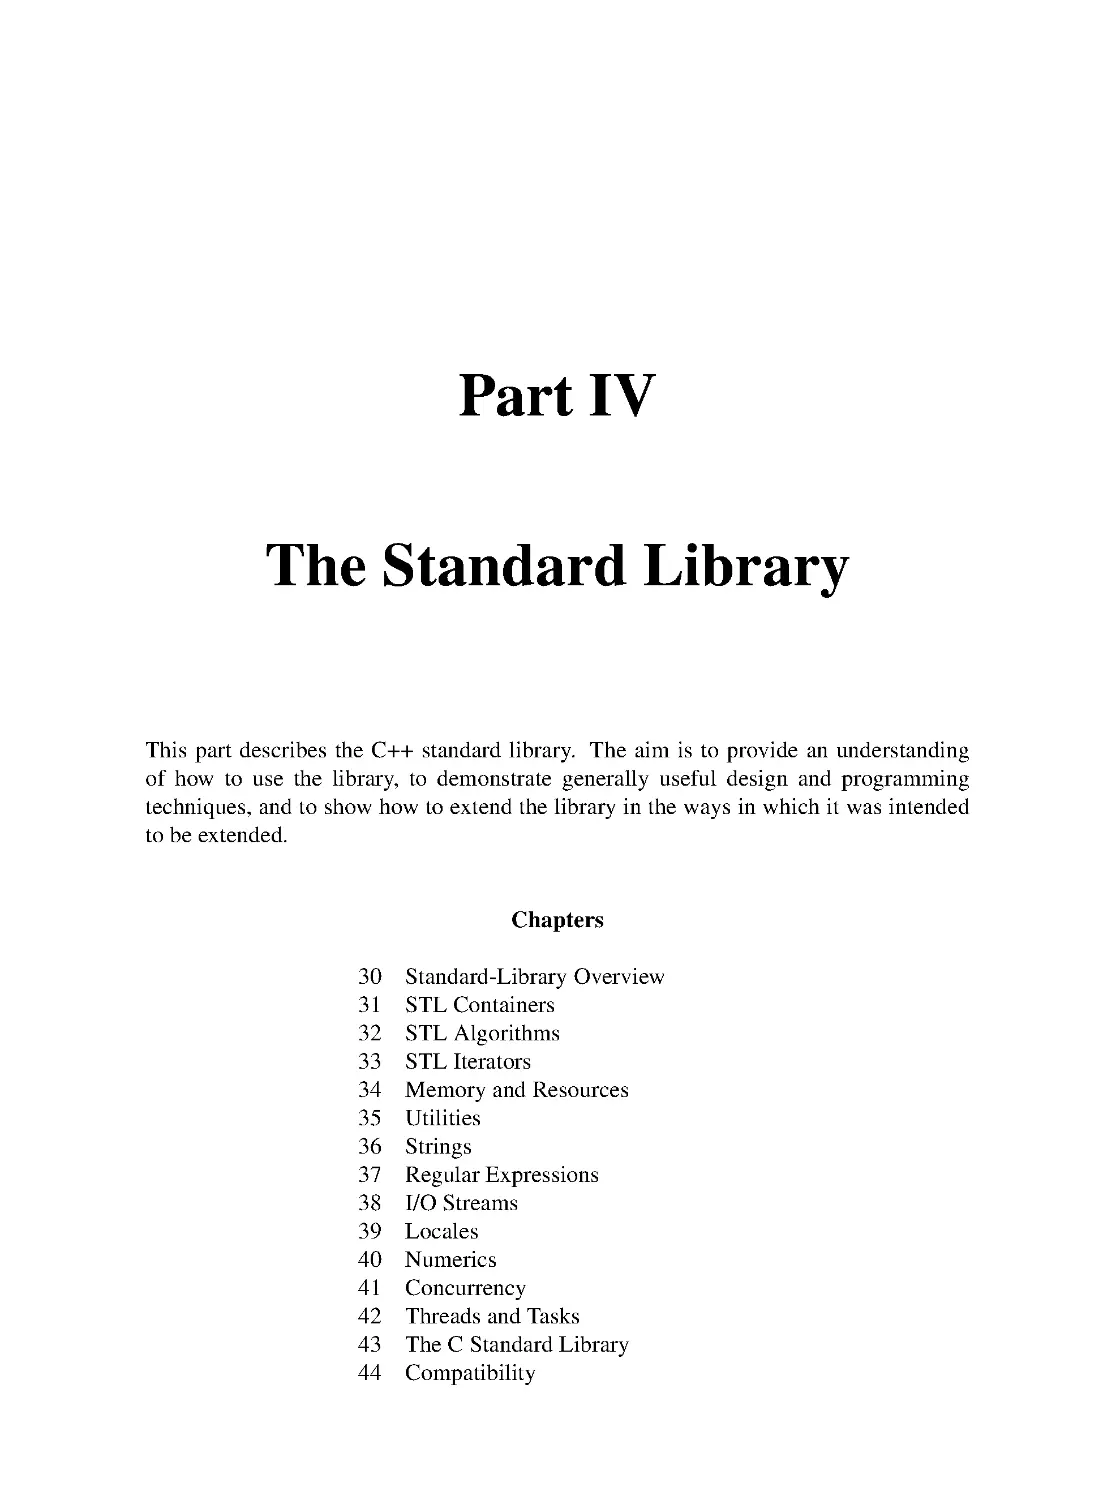 Part IV: The Standard Library